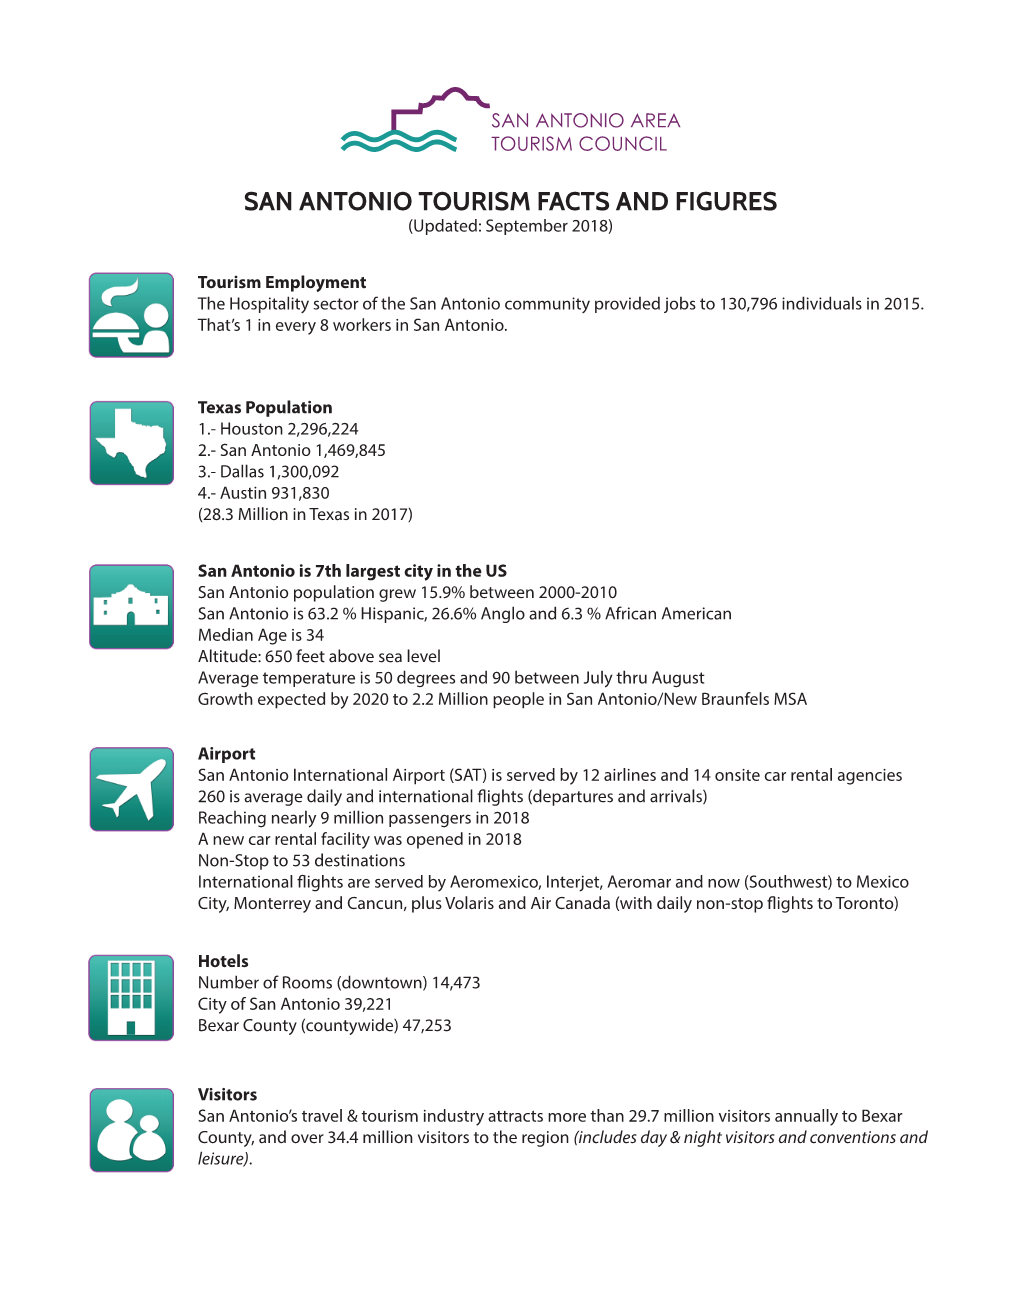 TOURISM FACTS and FIGURES (Updated: September 2018)